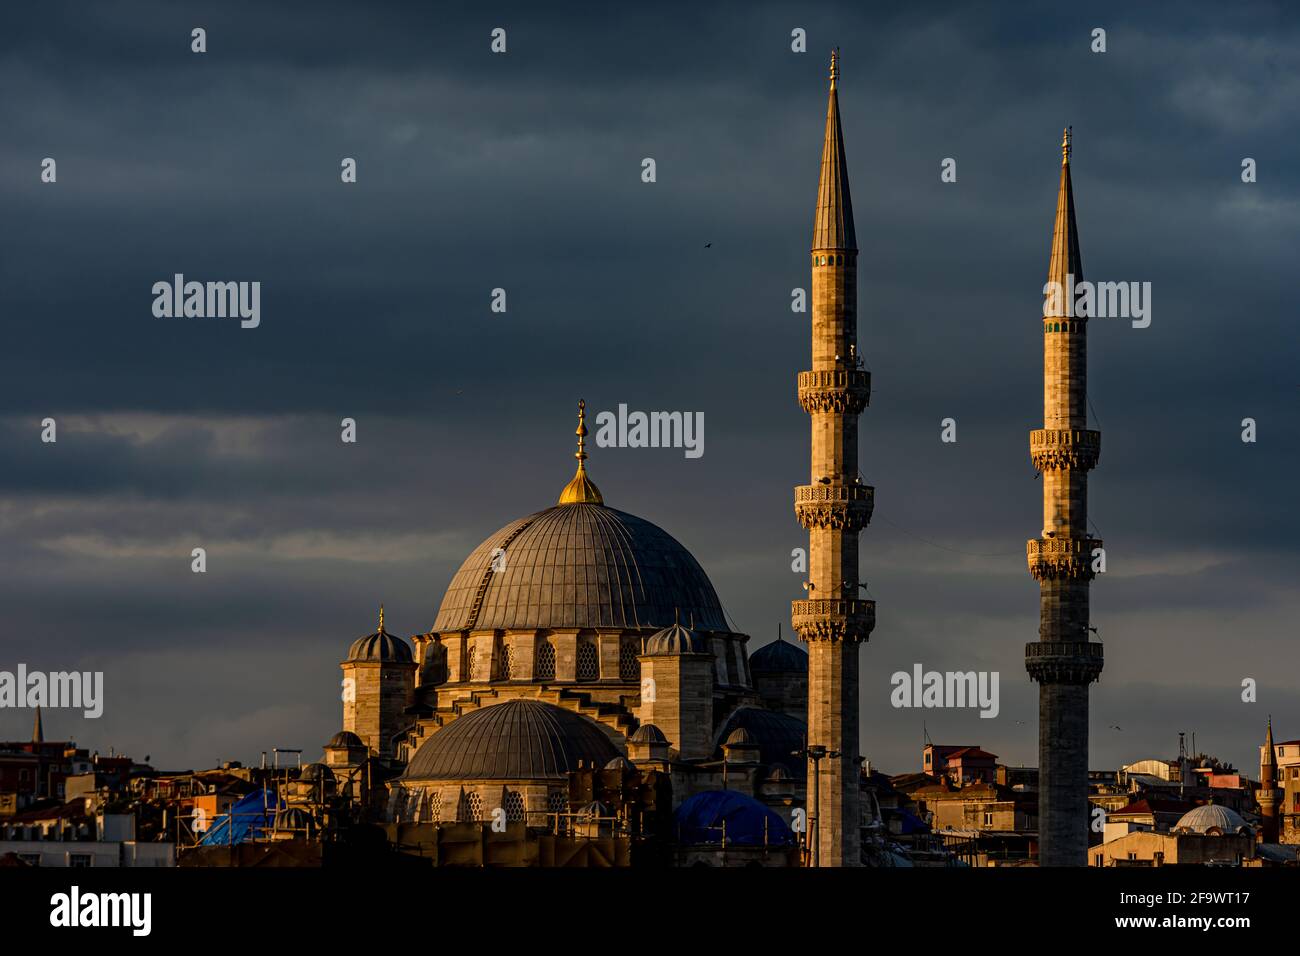 A Mosque in Turkey at sunset Stock Photo